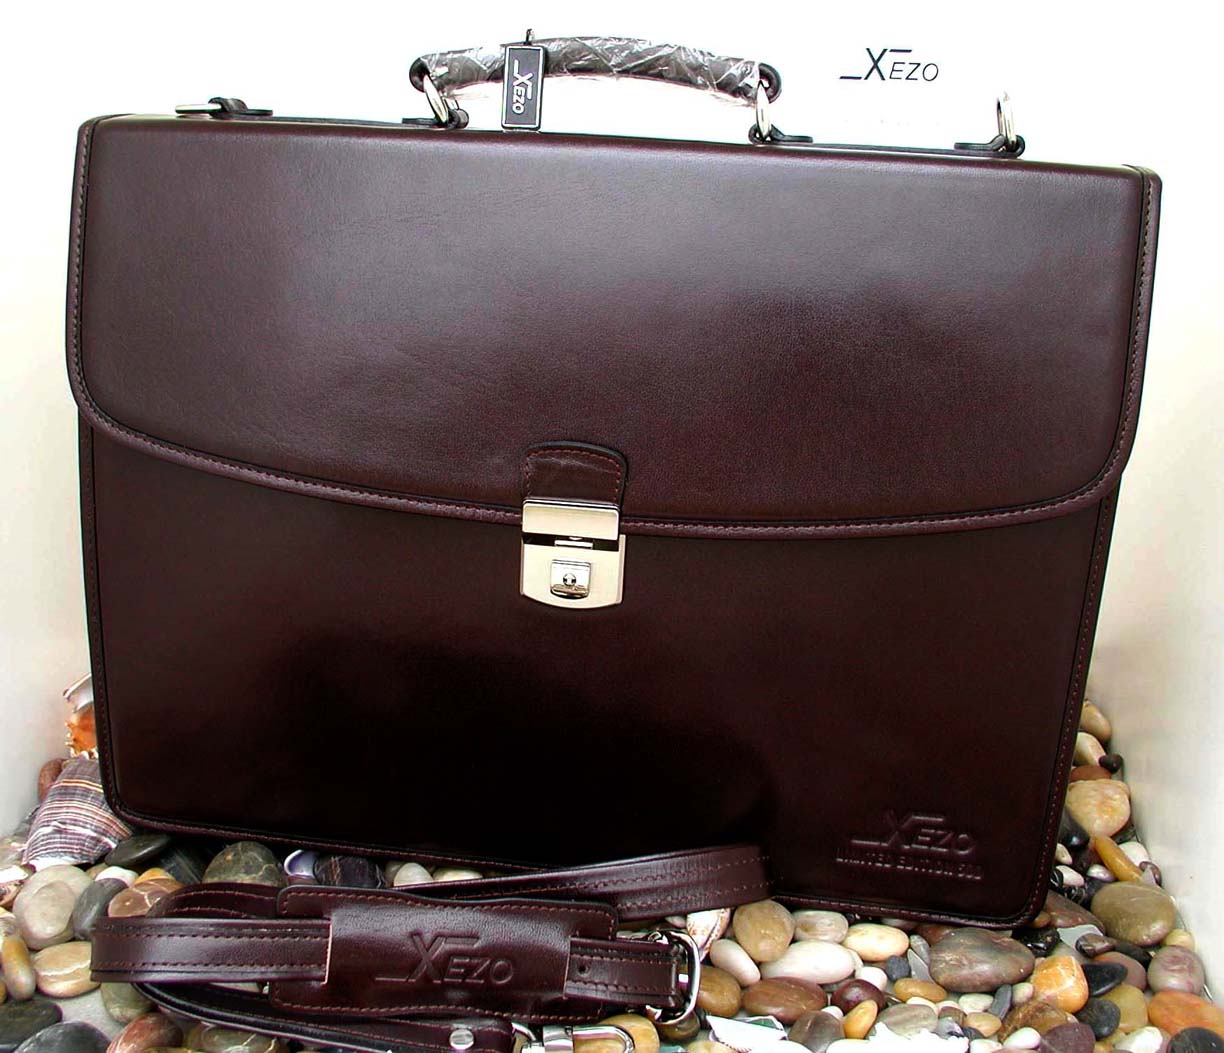 Xezo - Front view of the Brown Leather Briefcase with leather shoulder strap